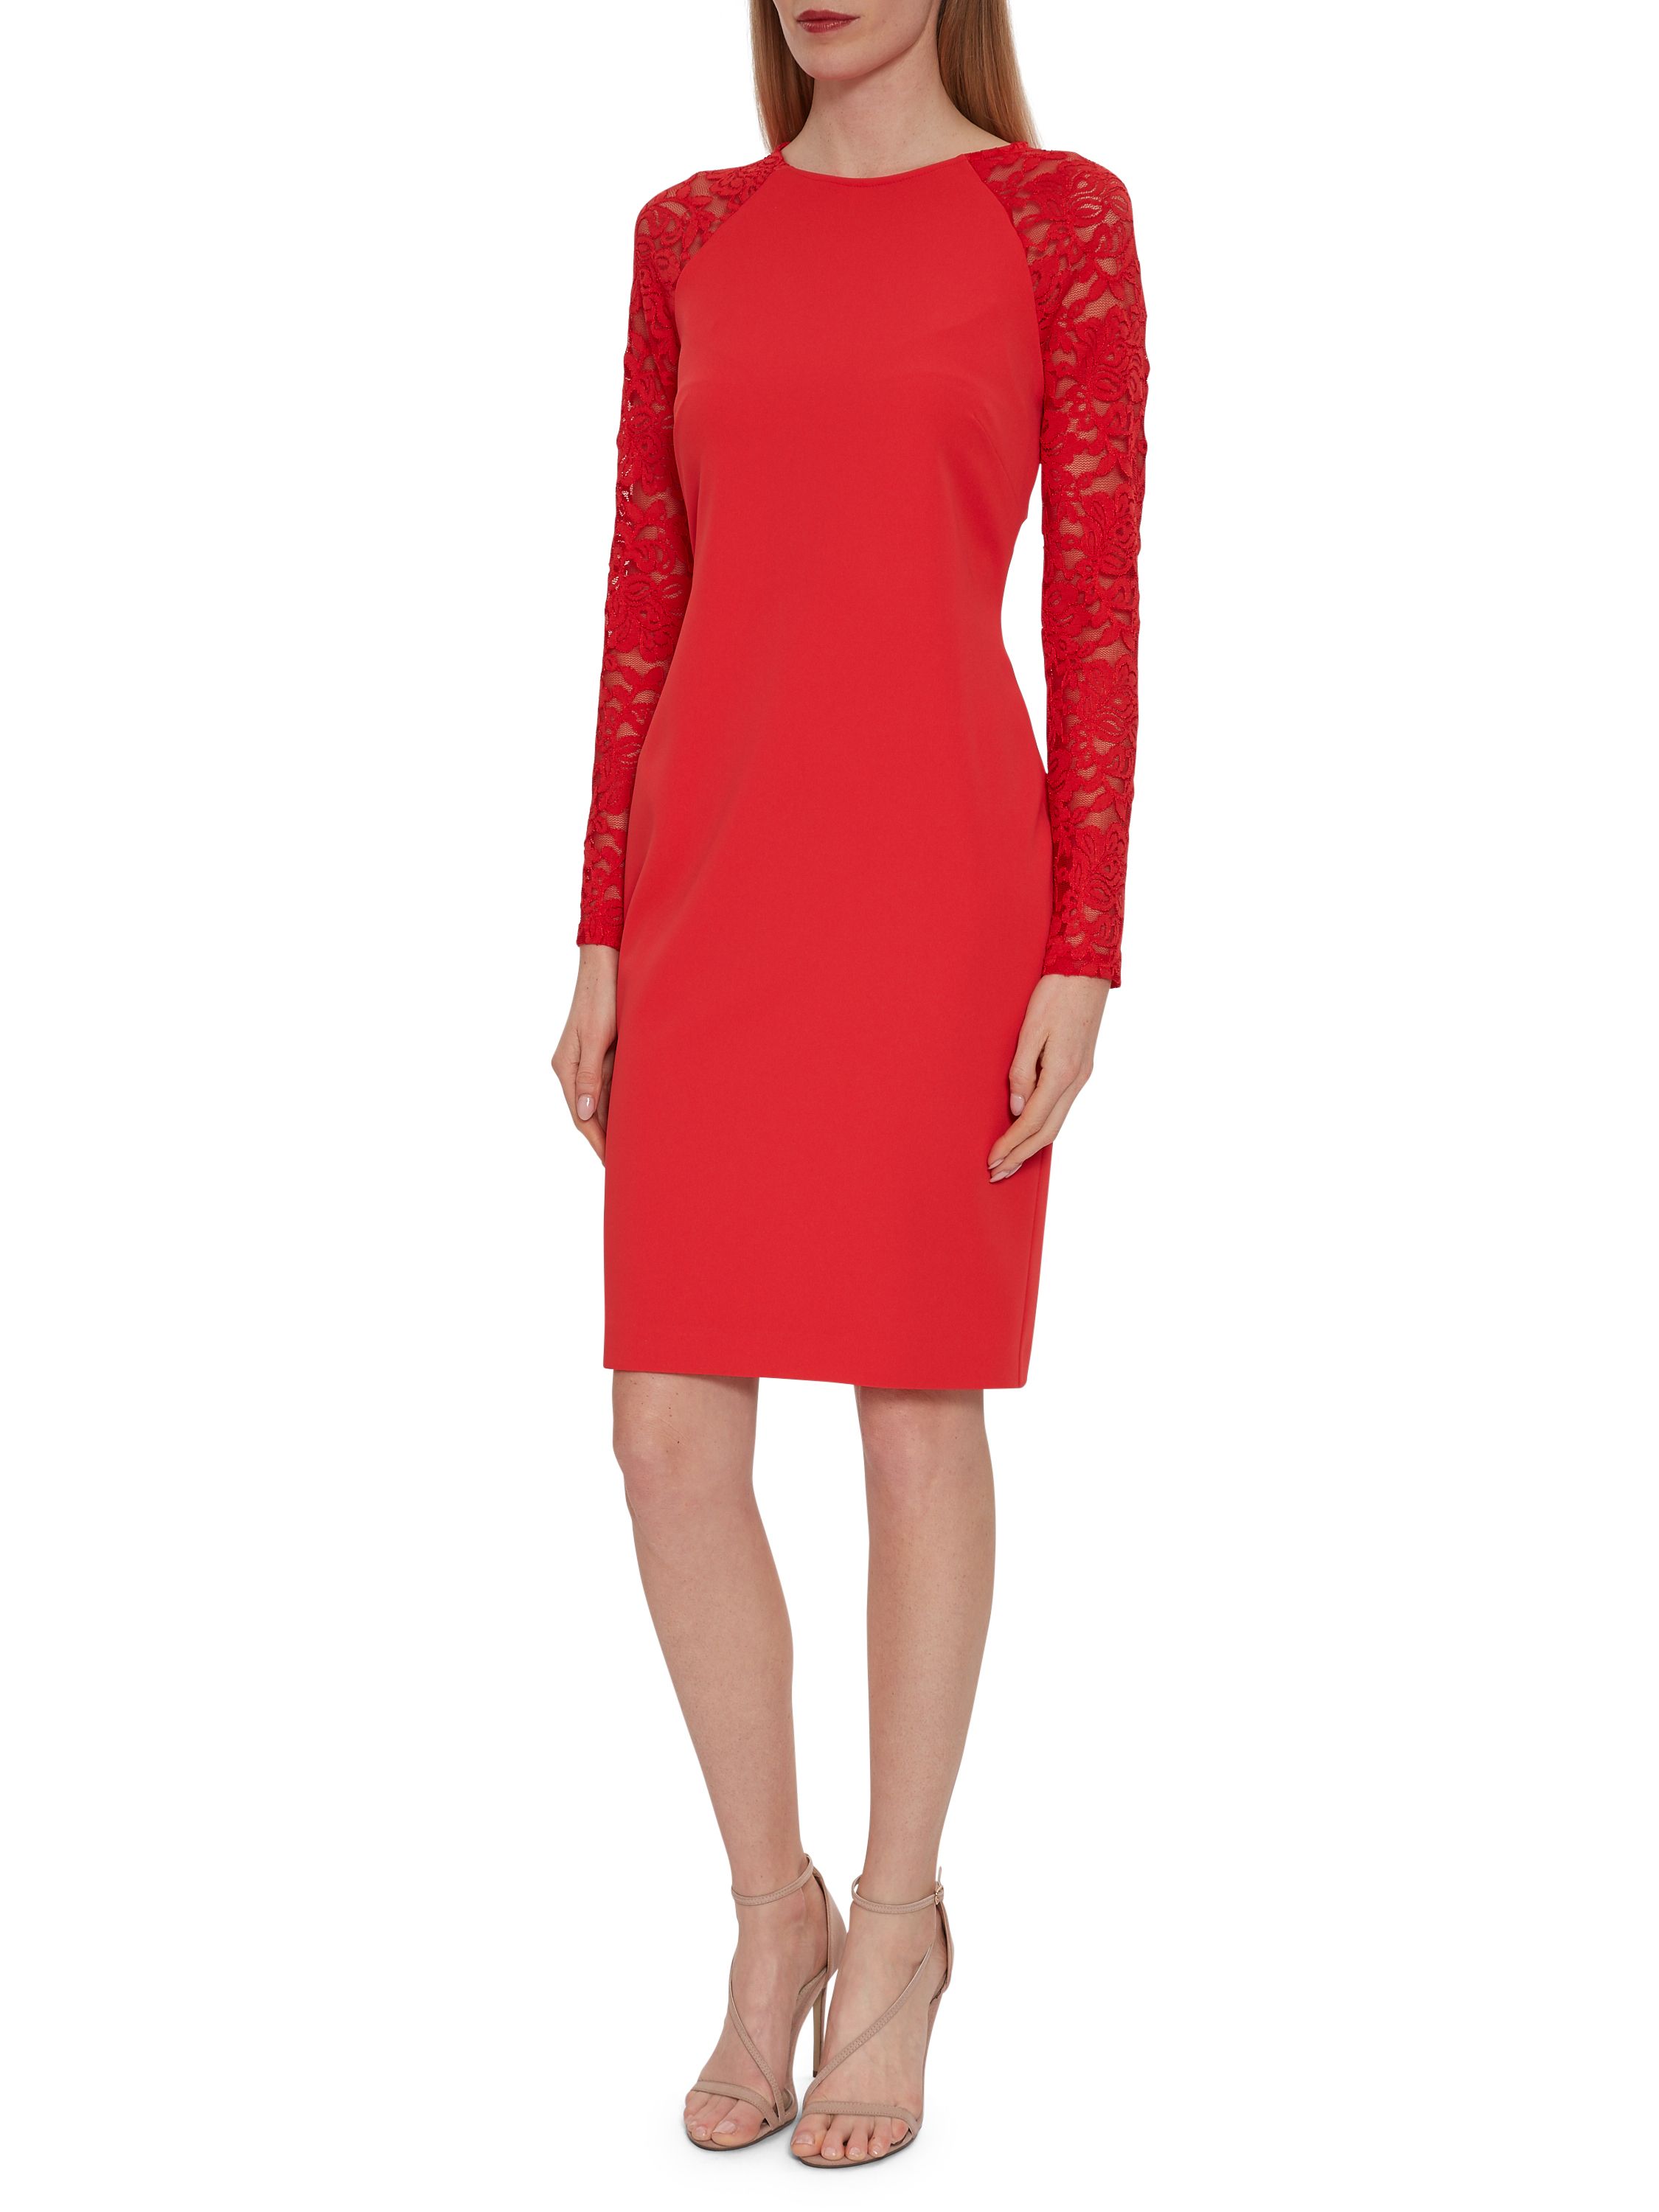 Gina Bacconi presents its stunning crepe and lace dress. This perfect occasionwear piece is comprised of a classic shift dress with sheer dainty floral lace sleeves. This beautiful dress is perfect for a summer party or special occasion. The dress is part